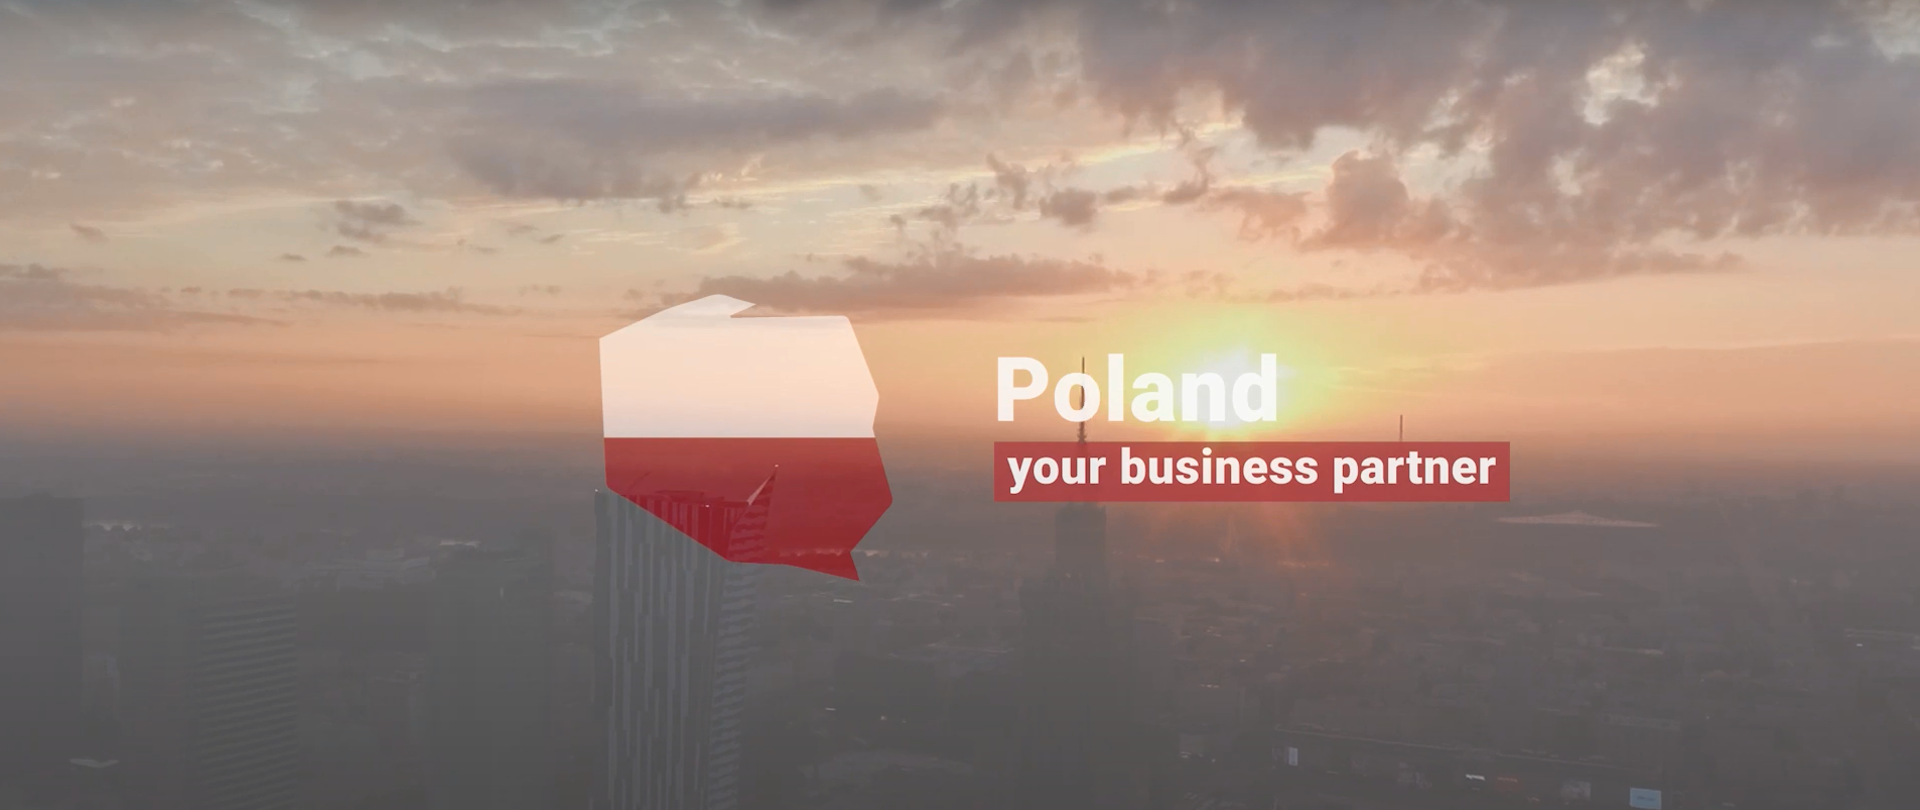 Poland – a land of business opportunity